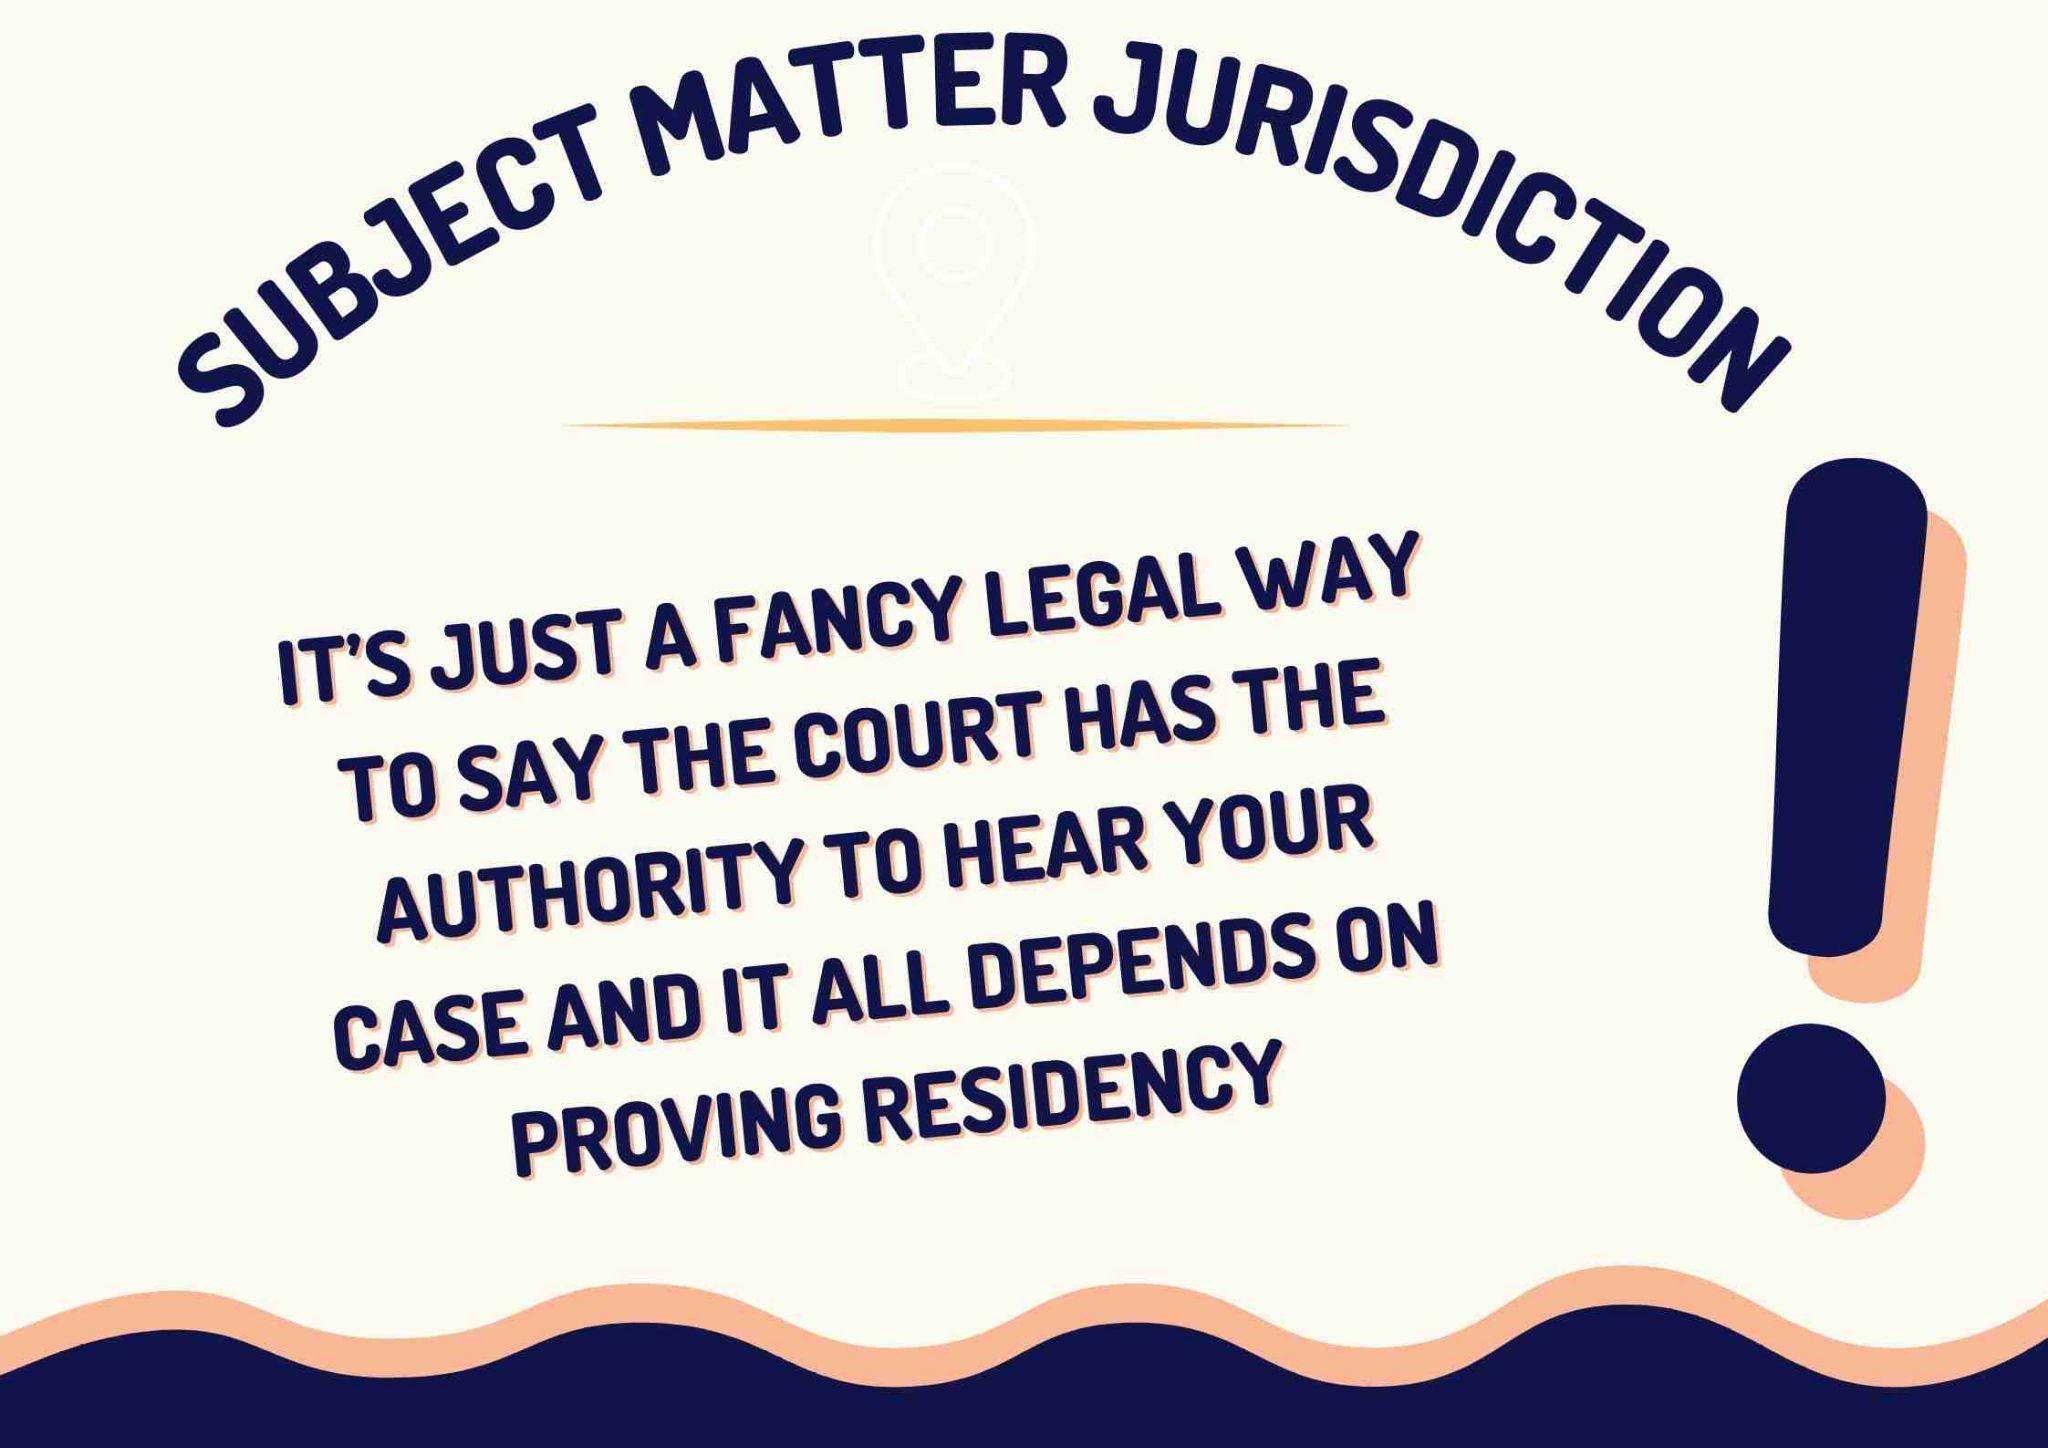 The image displays an infographic explaining "subject matter jurisdiction" with a description saying it is a legal term for a court's authority to hear a case.